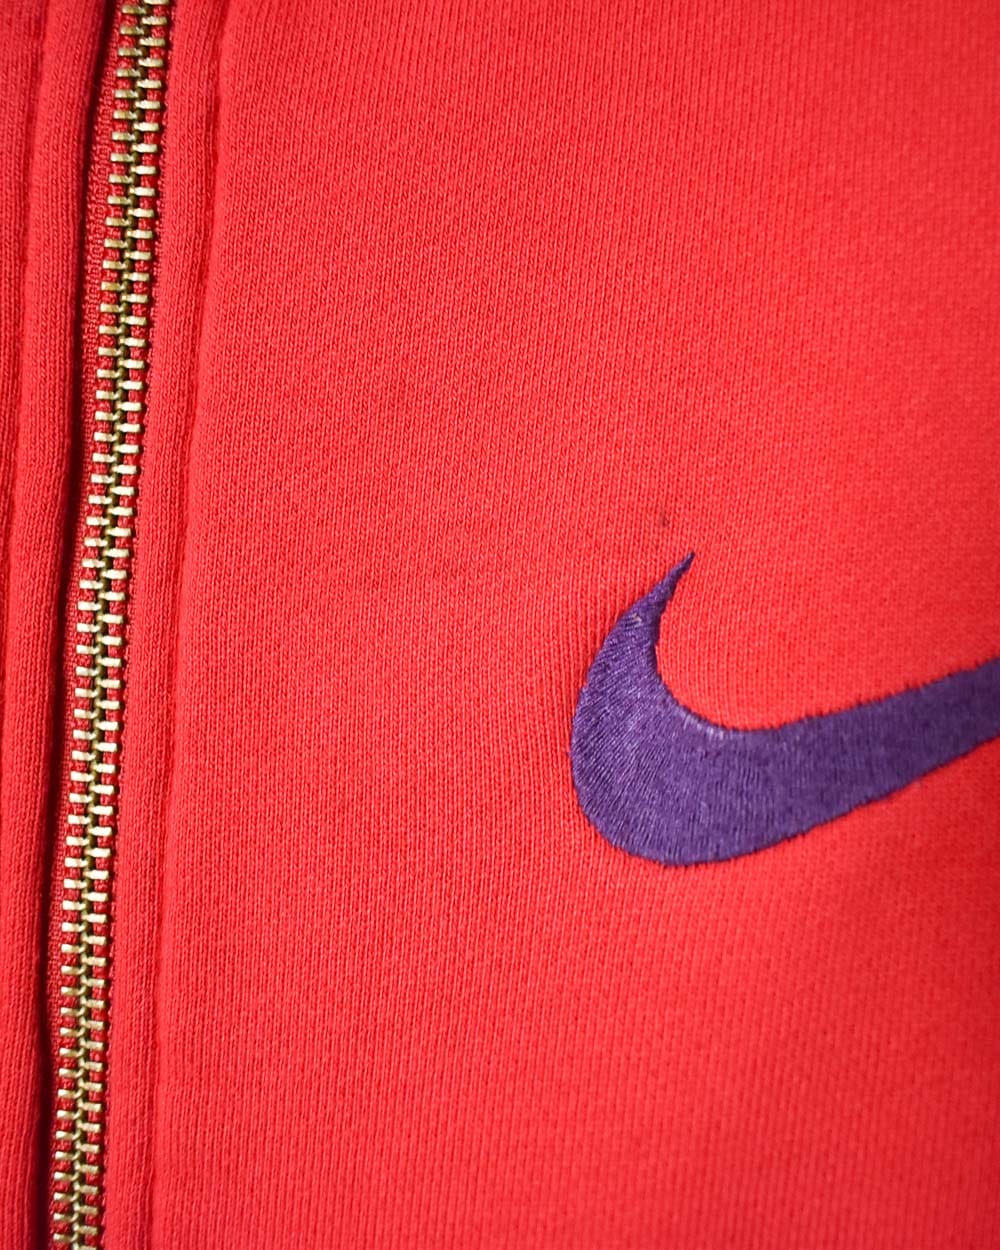 Red Nike Track and Field Zip-Through Sweatshirt - Large